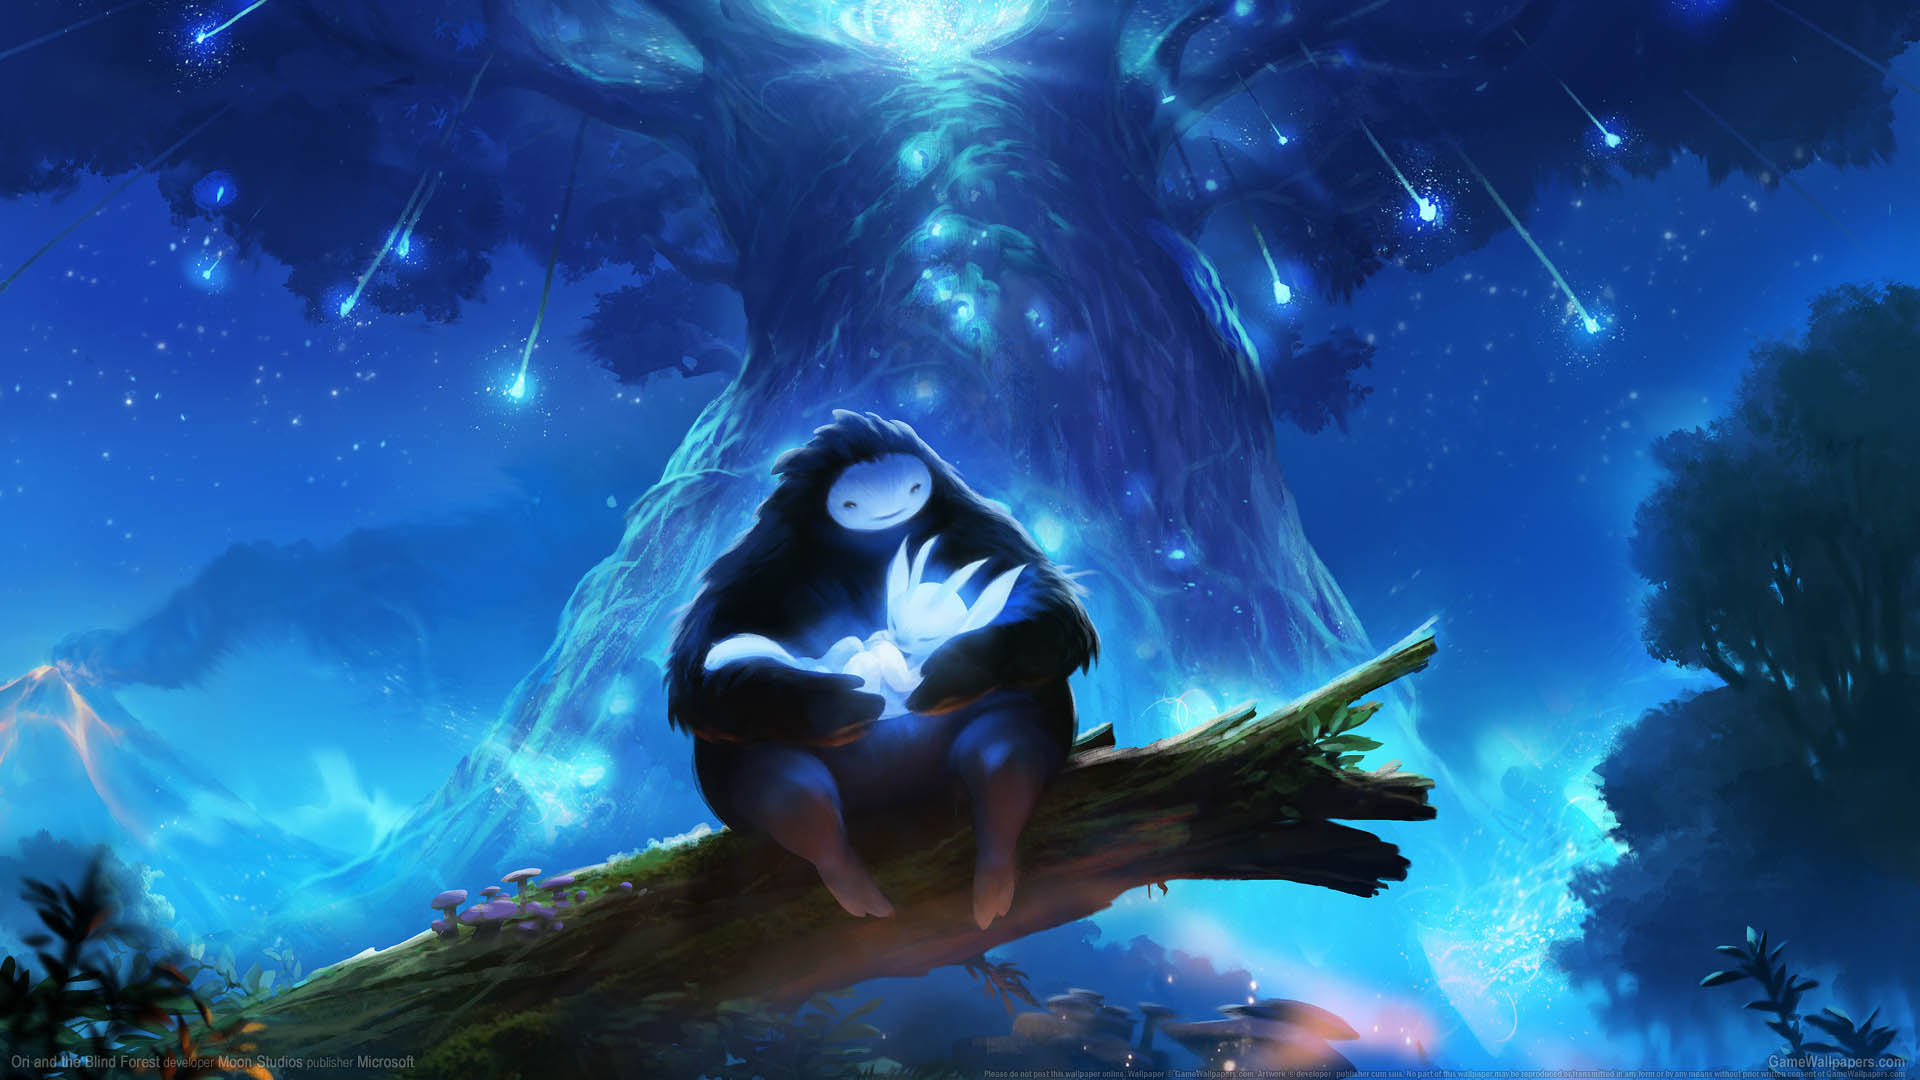 Ori and the Blind Forest fond d'cran 01 1920x1080